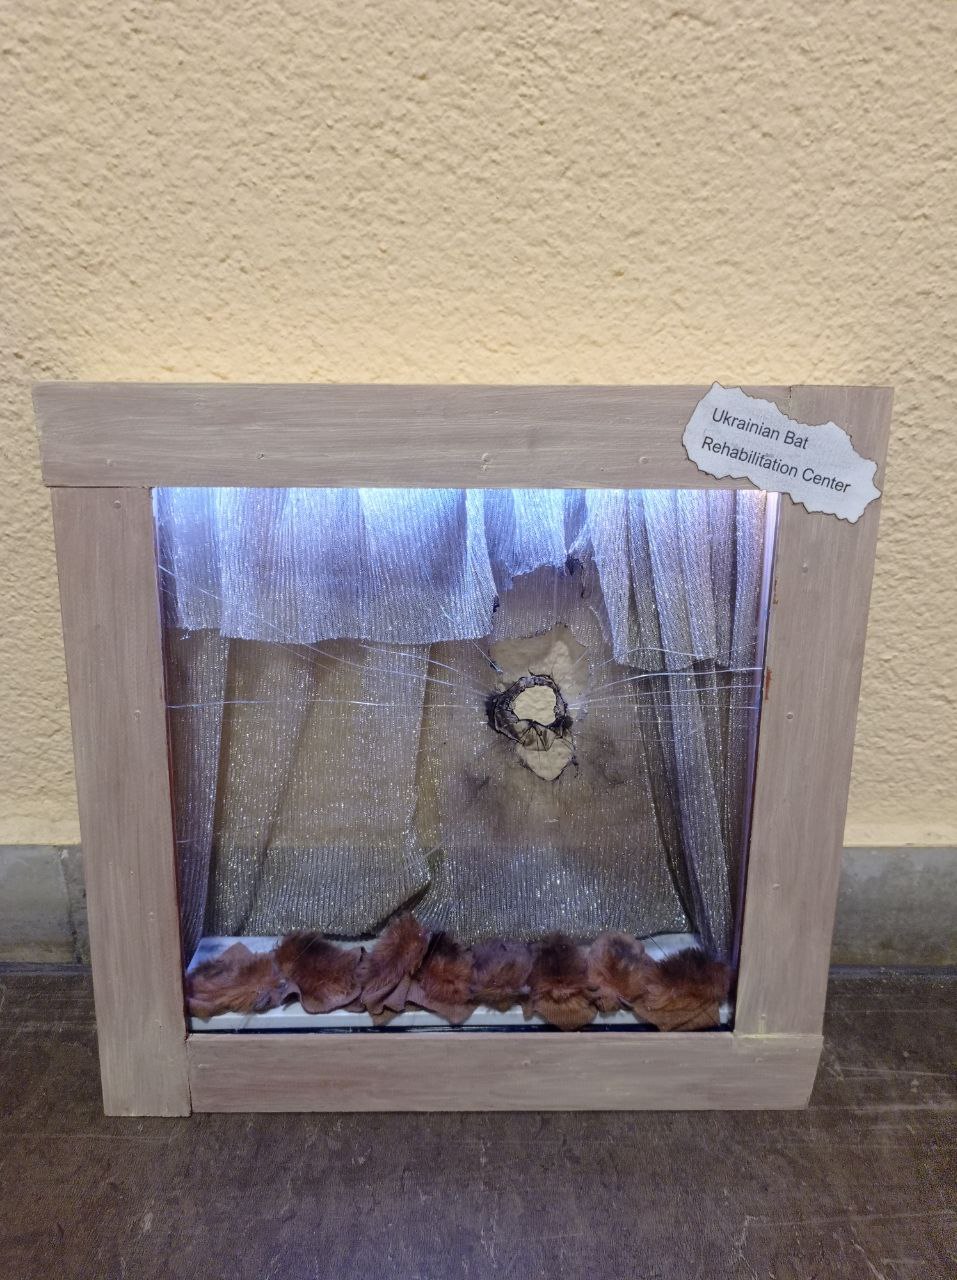 Artwork about bats trapped in window trap